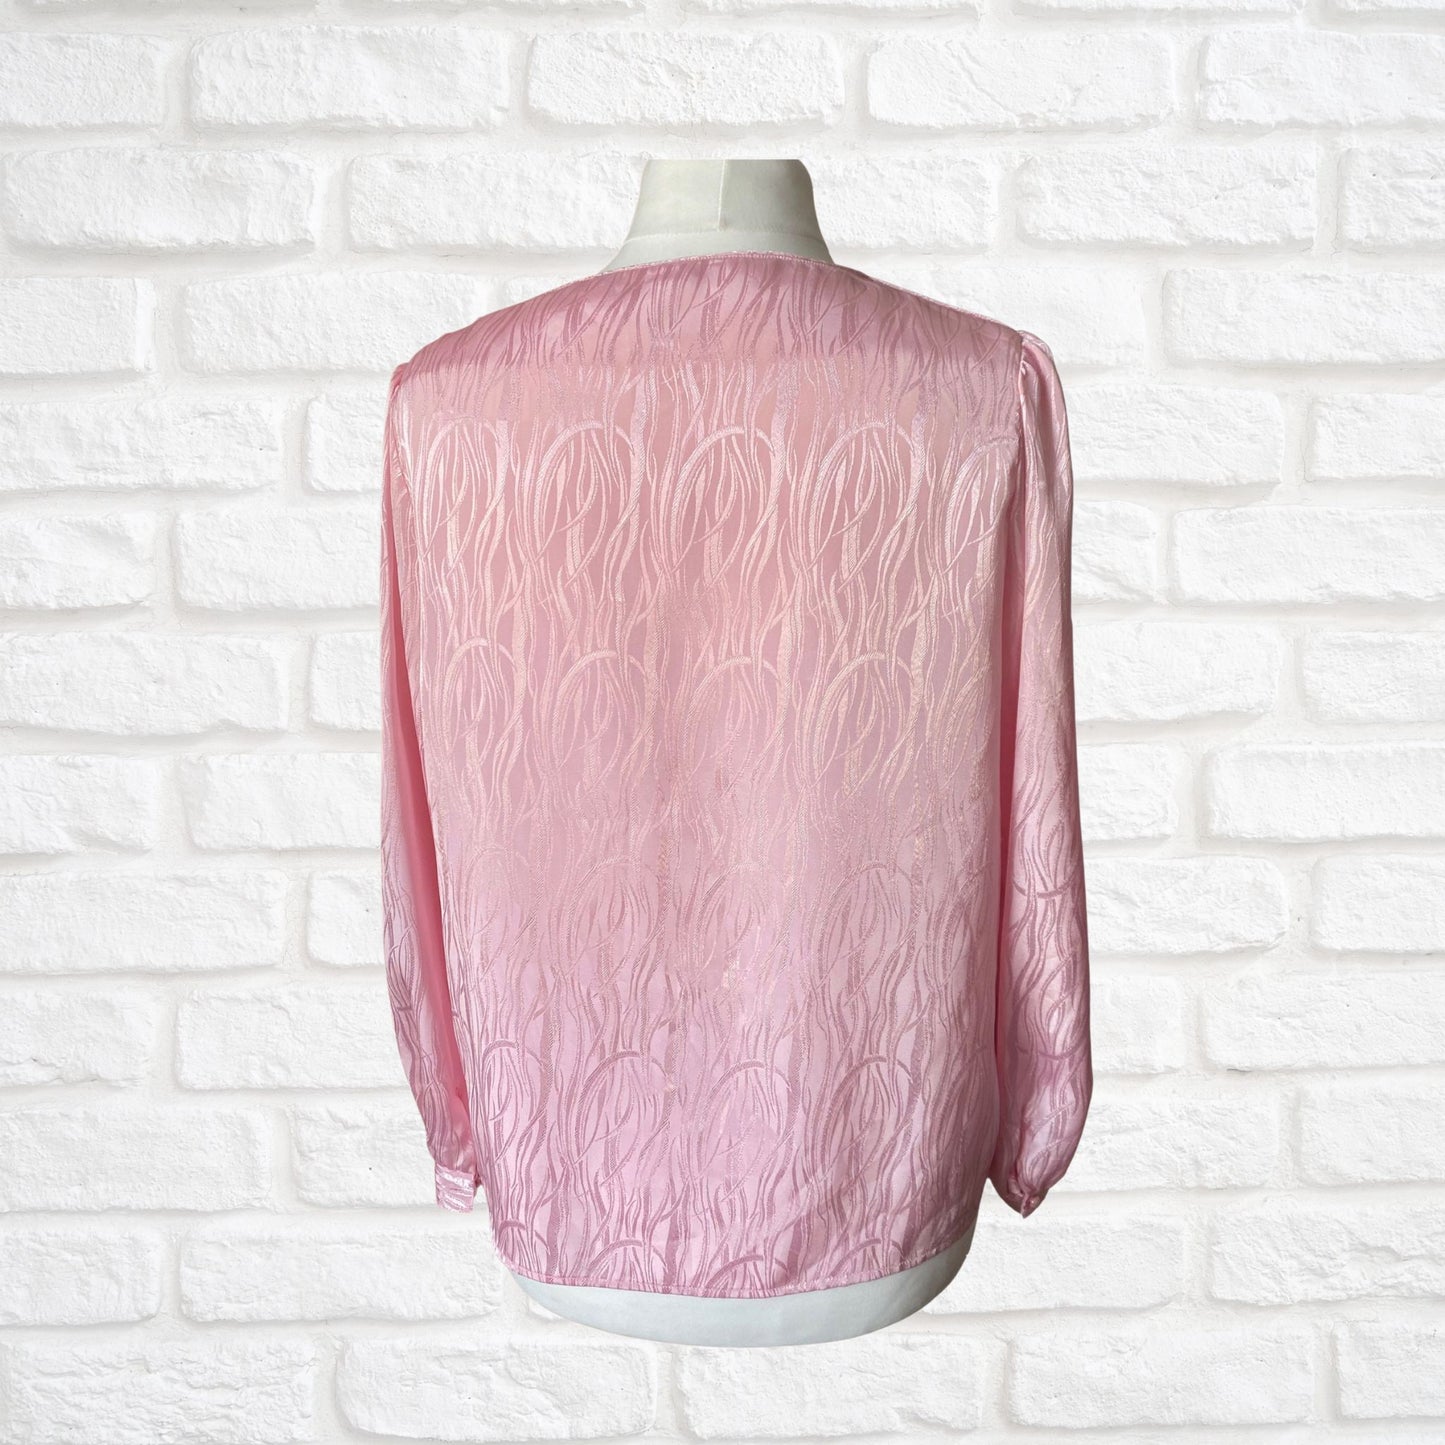 80s pink silk textured round neck blouse with pretty shoulder detail.   Approx  UK size 14-16